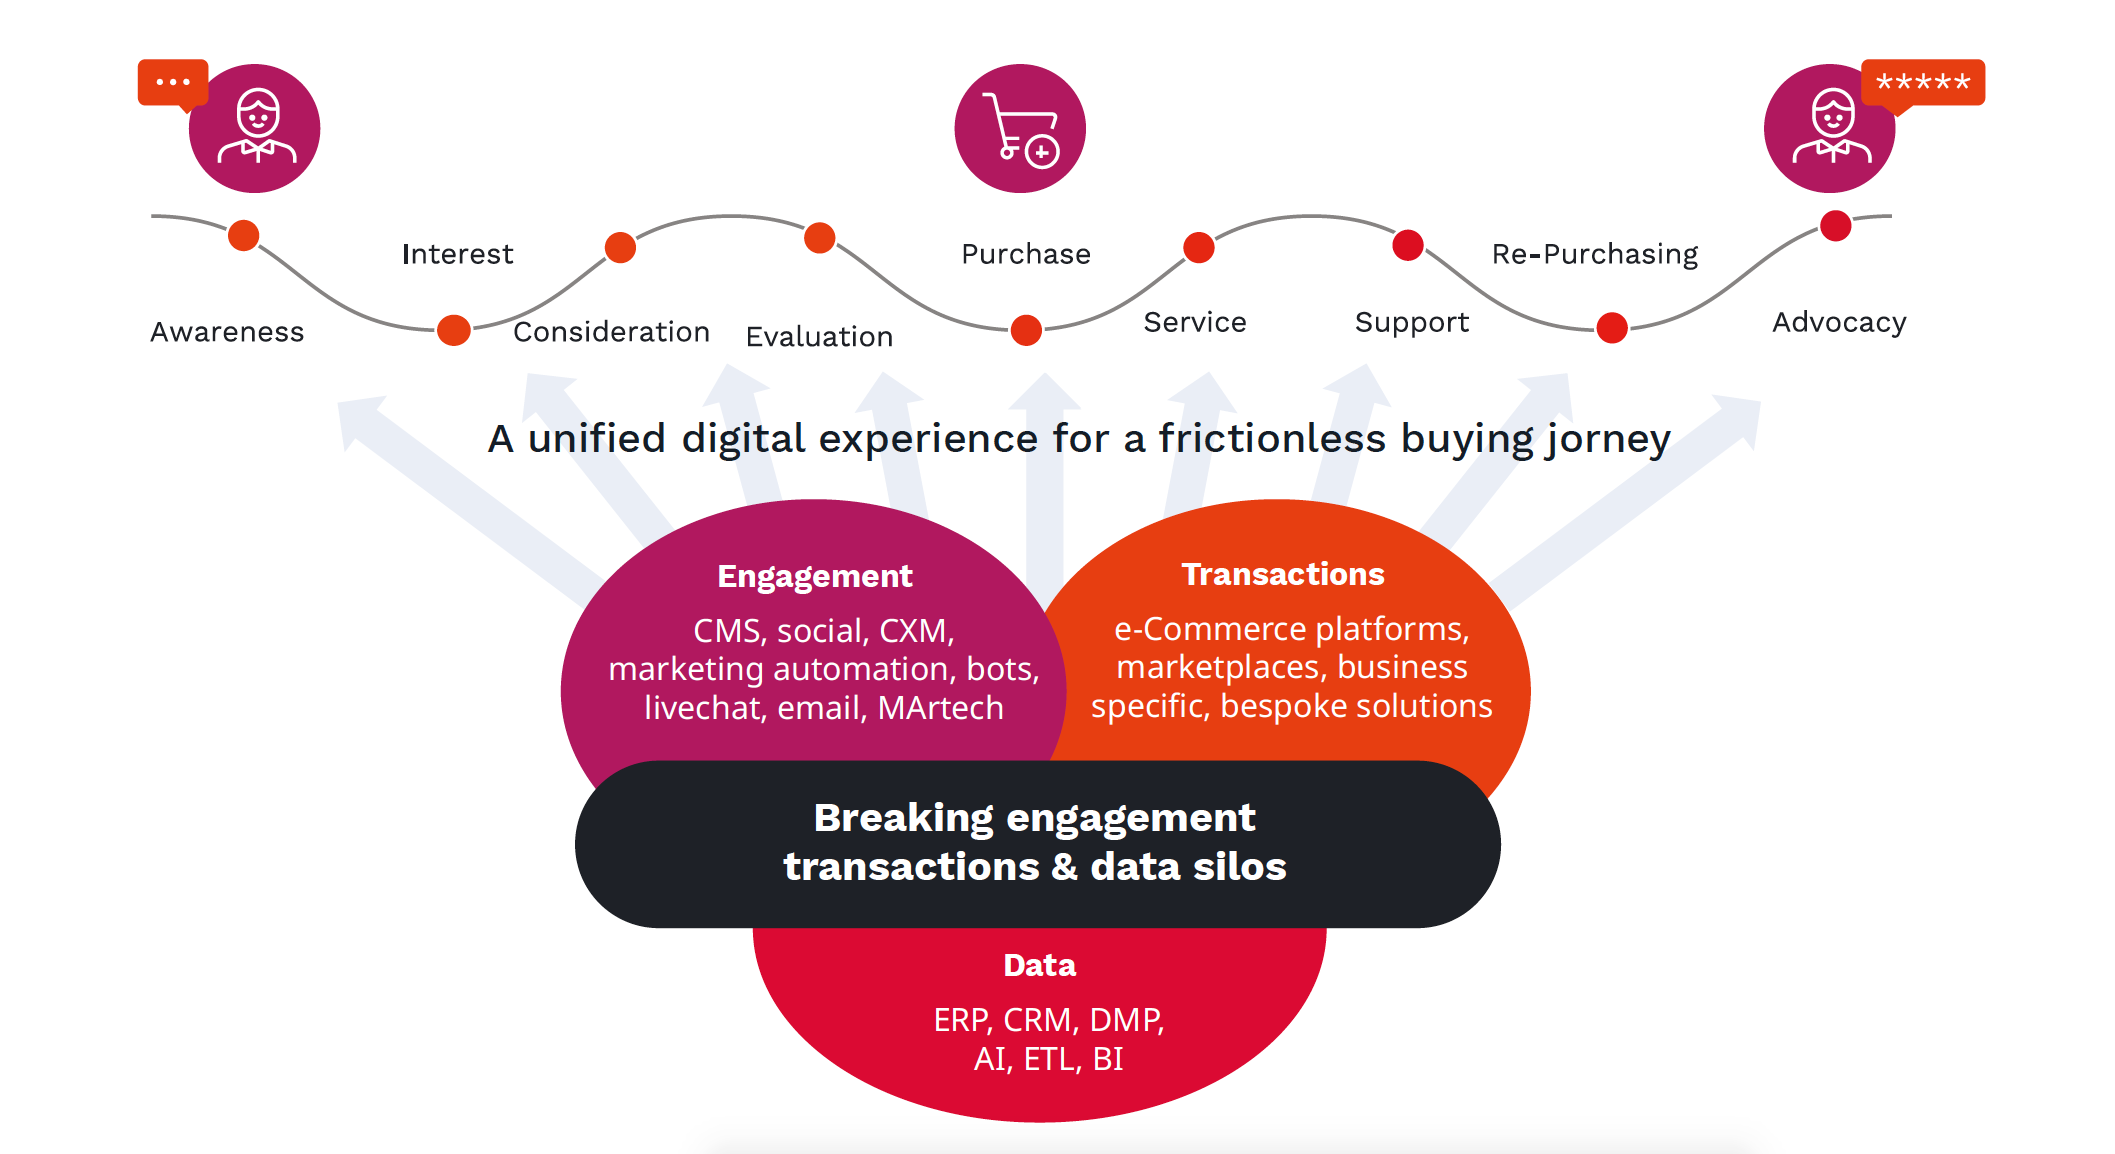 A unified digital experience for a frictionless buying journey